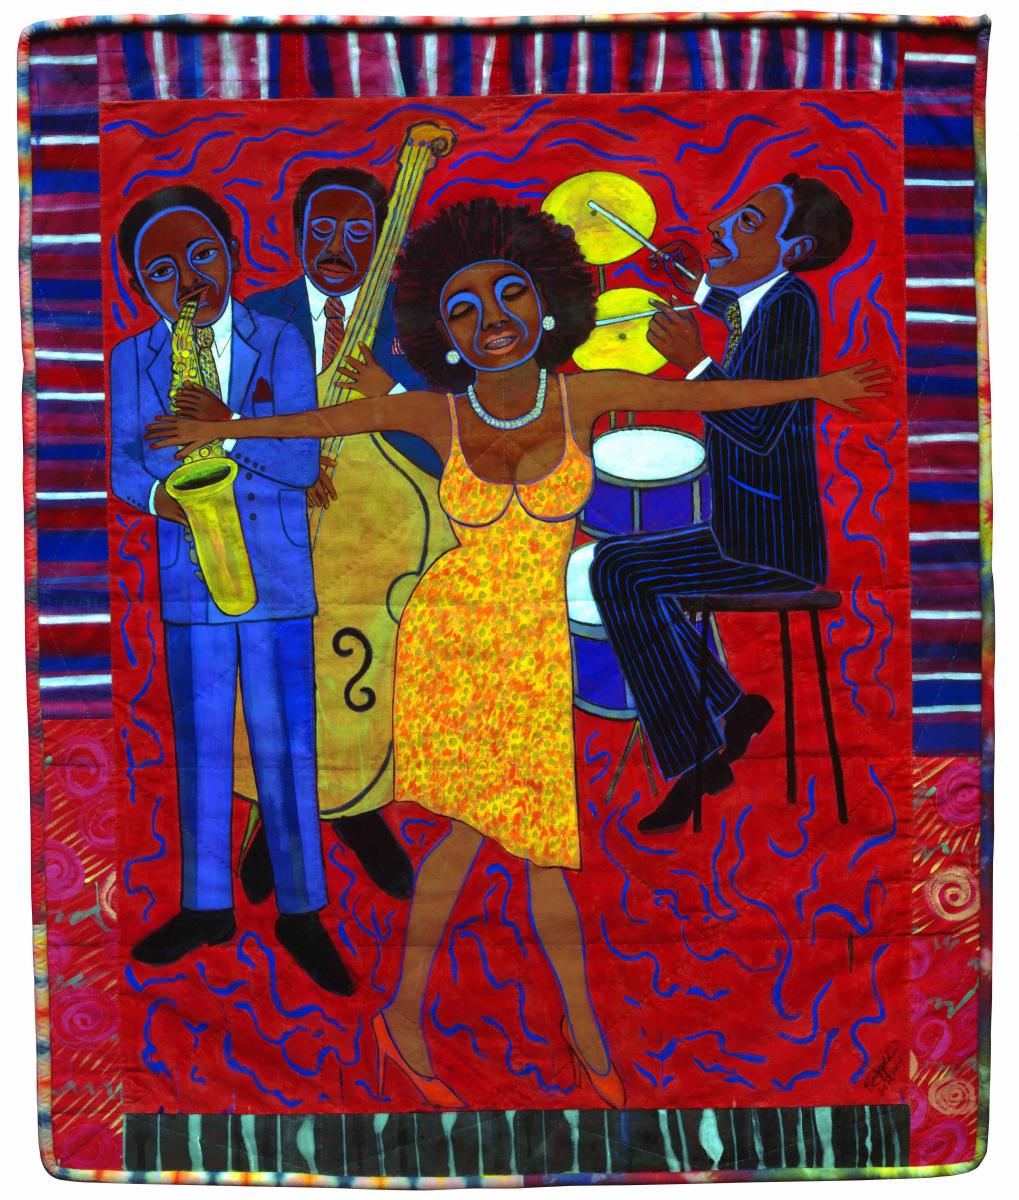 Faith Ringgold, Jazz Stories: Mama Can Sing, Papa Can Blow #1: Somebody Stole My Broken Heart, 2004, Acrylic on canvas with pieced fabric border, © 2018 Faith Ringgold / Artists Rights Society (ARS), New York, Courtesy ACA Galleries, New York